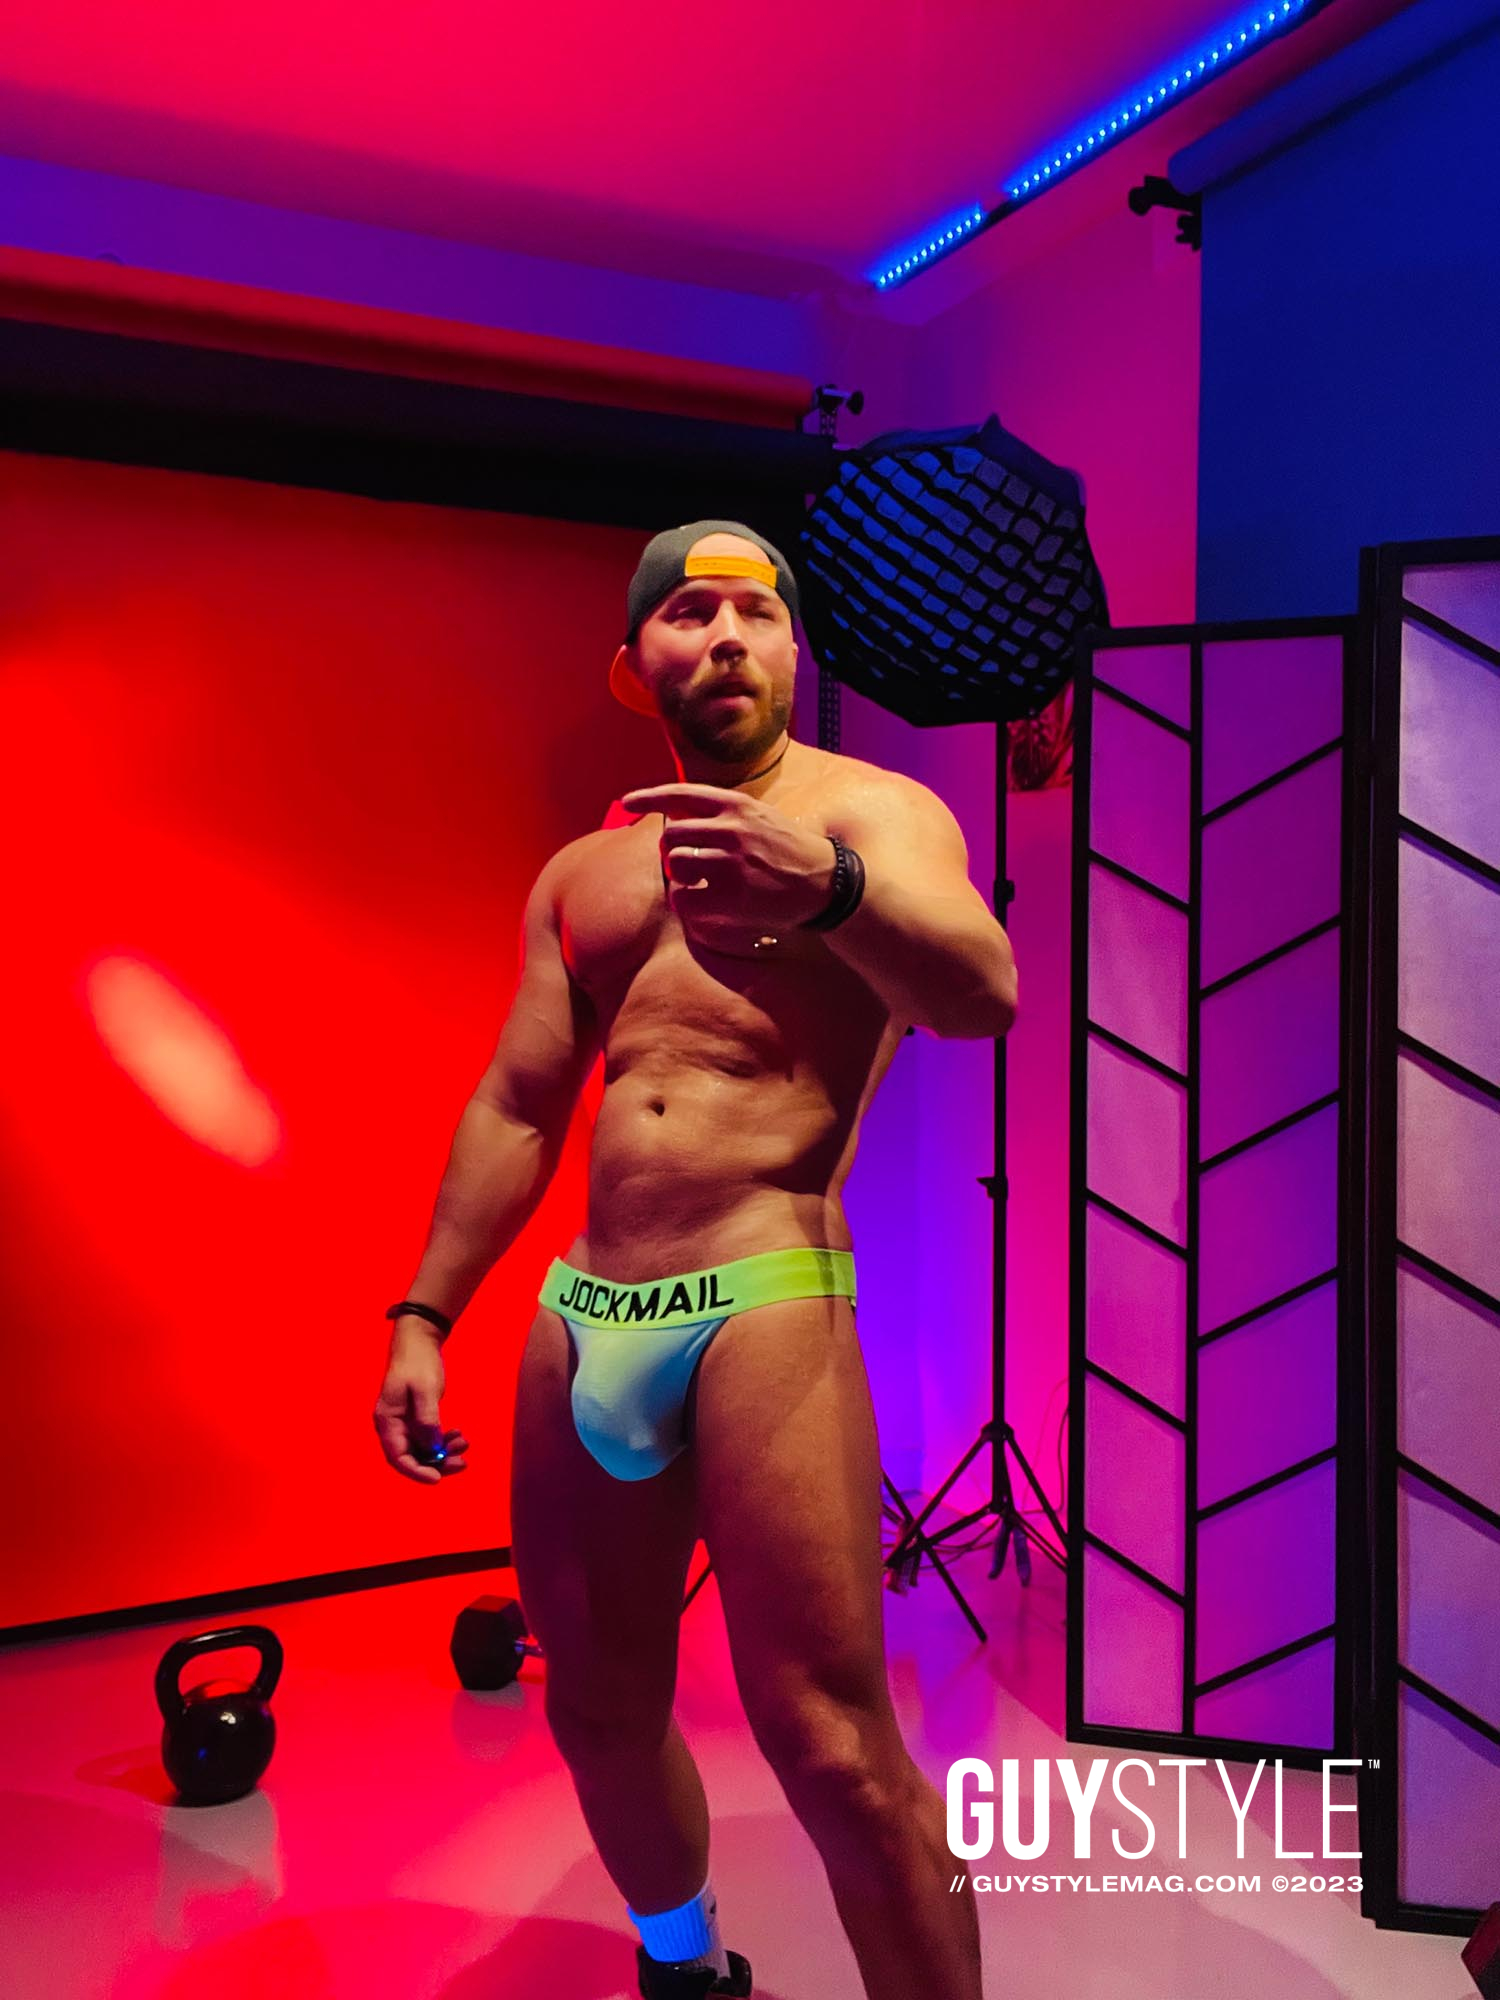 Neon Dreams & Gym Routines: JOCKMAIL's Trendsetting Take on Underwear! – Men's Underwear Reviews with Maxwell Alexander